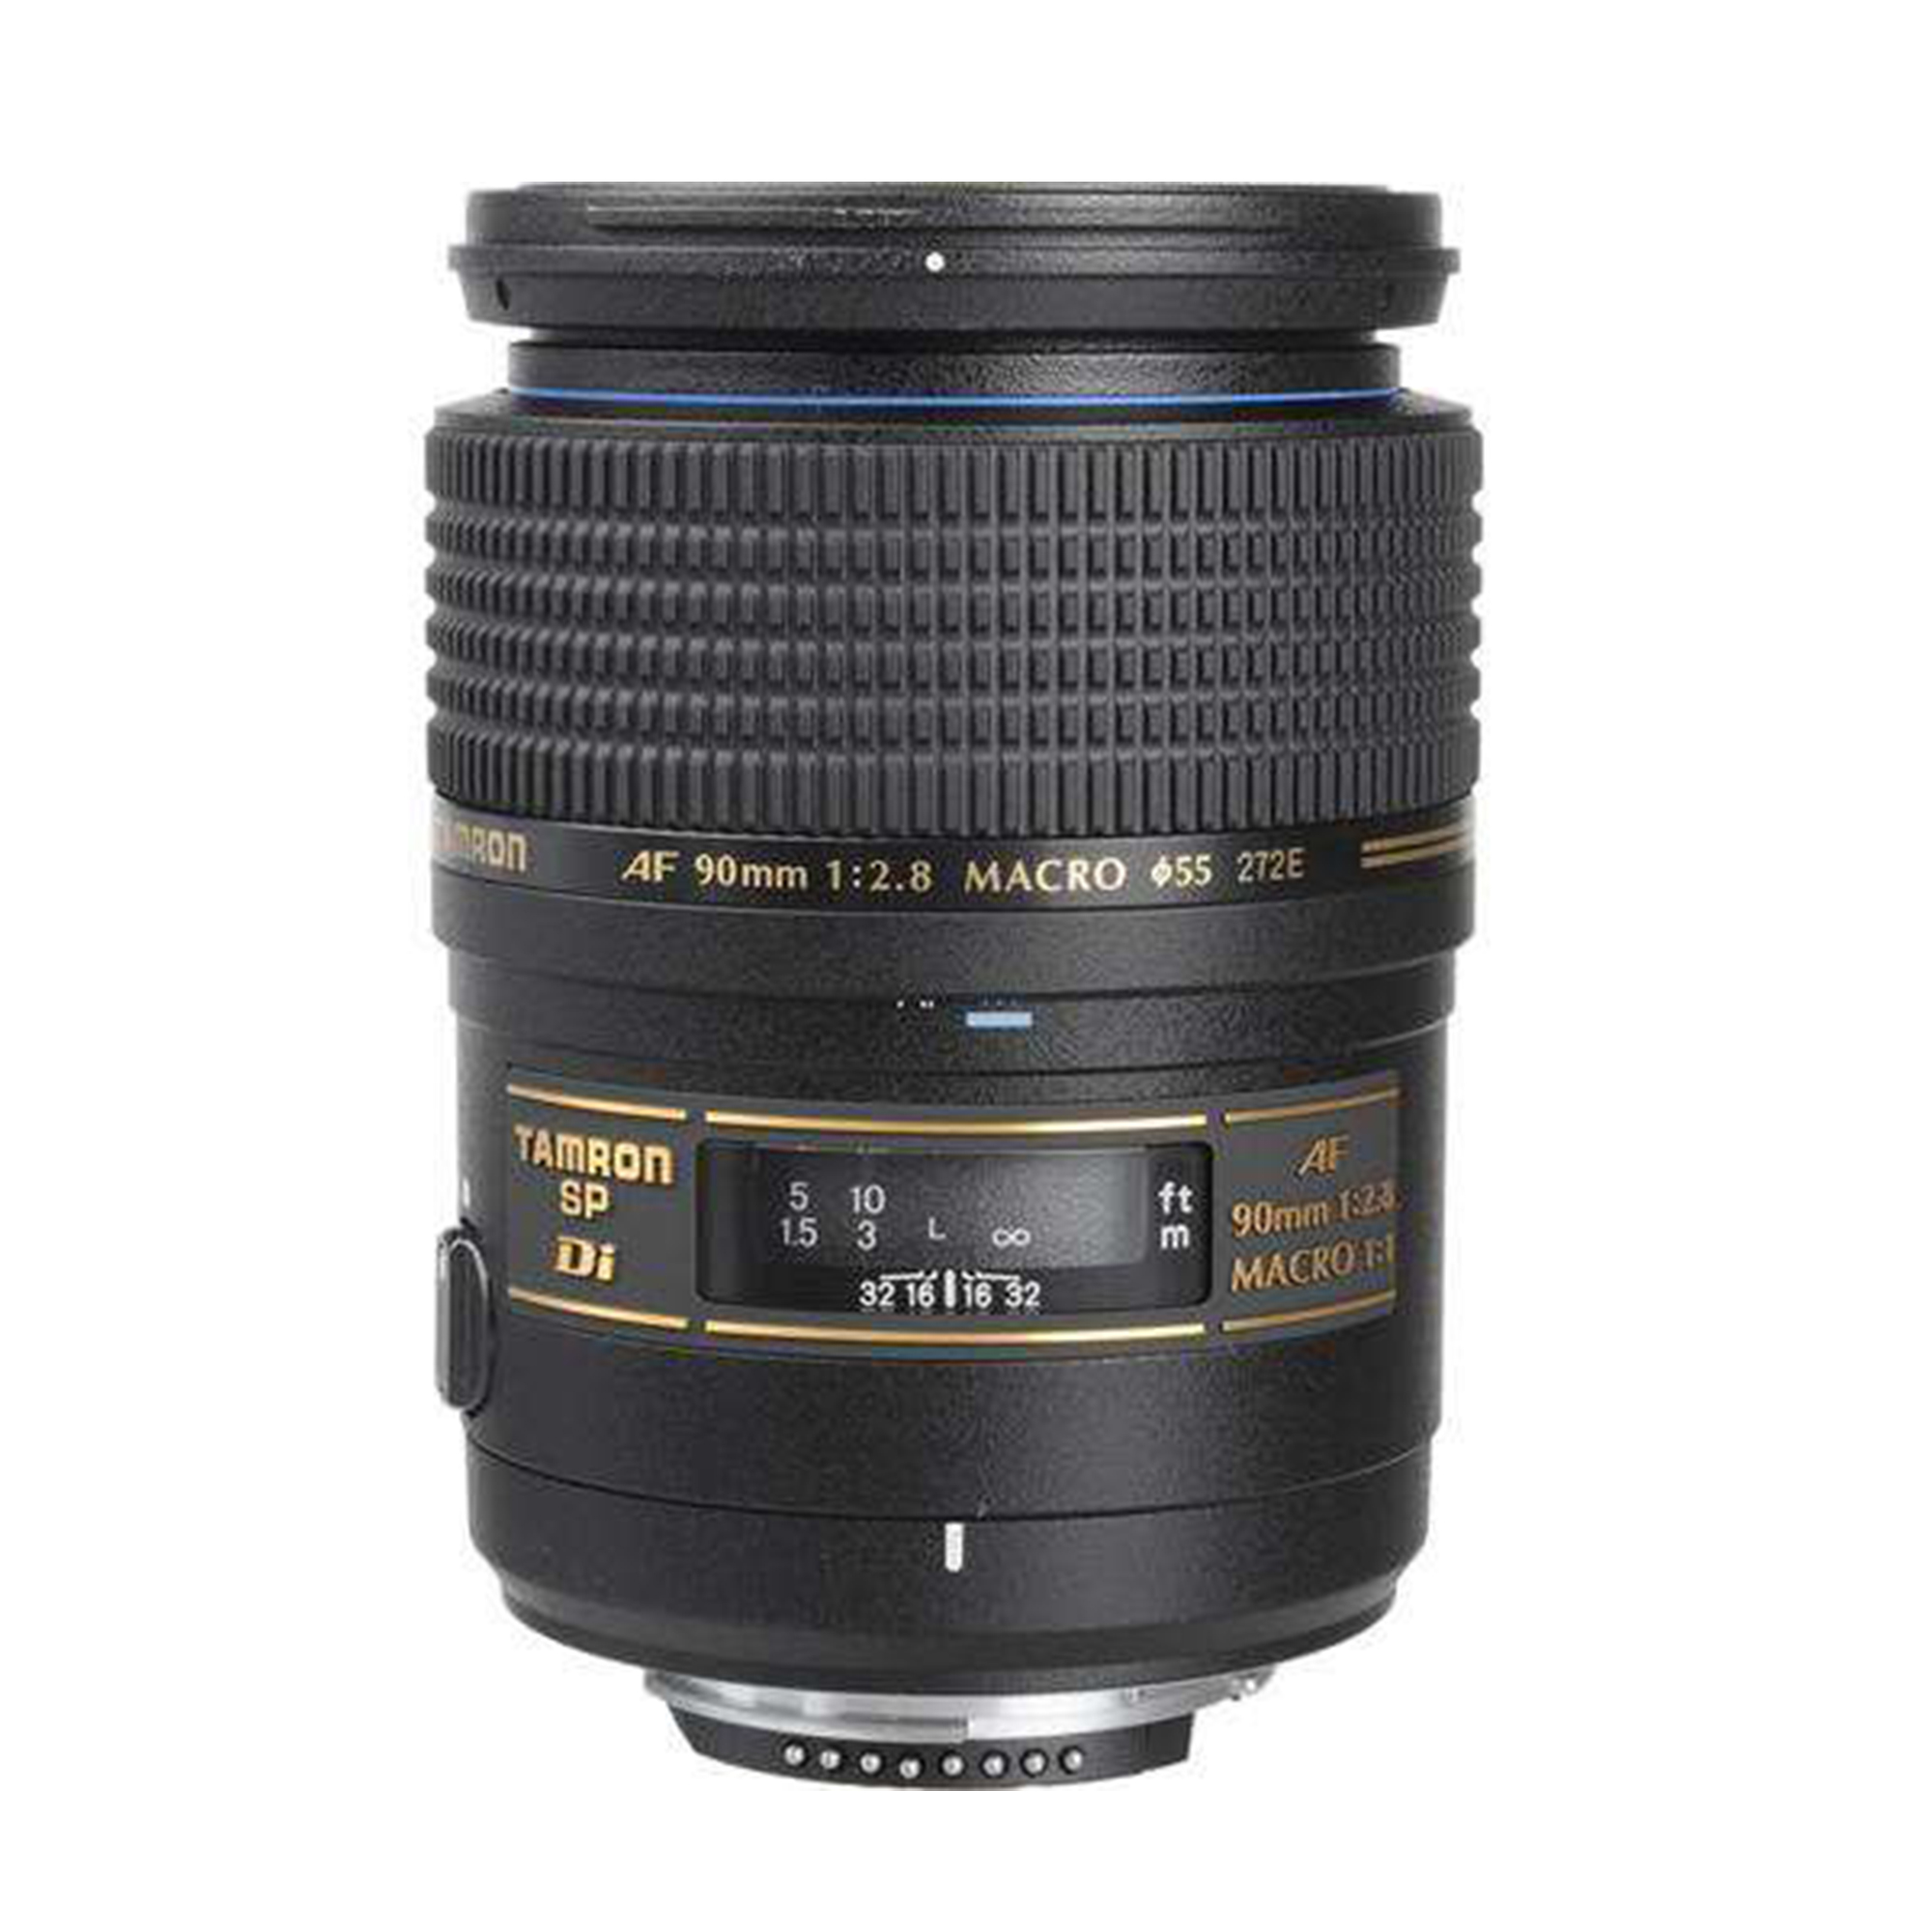 Tamron 90mm f/2.8 SP AF Di Macro Lens for Canon EF